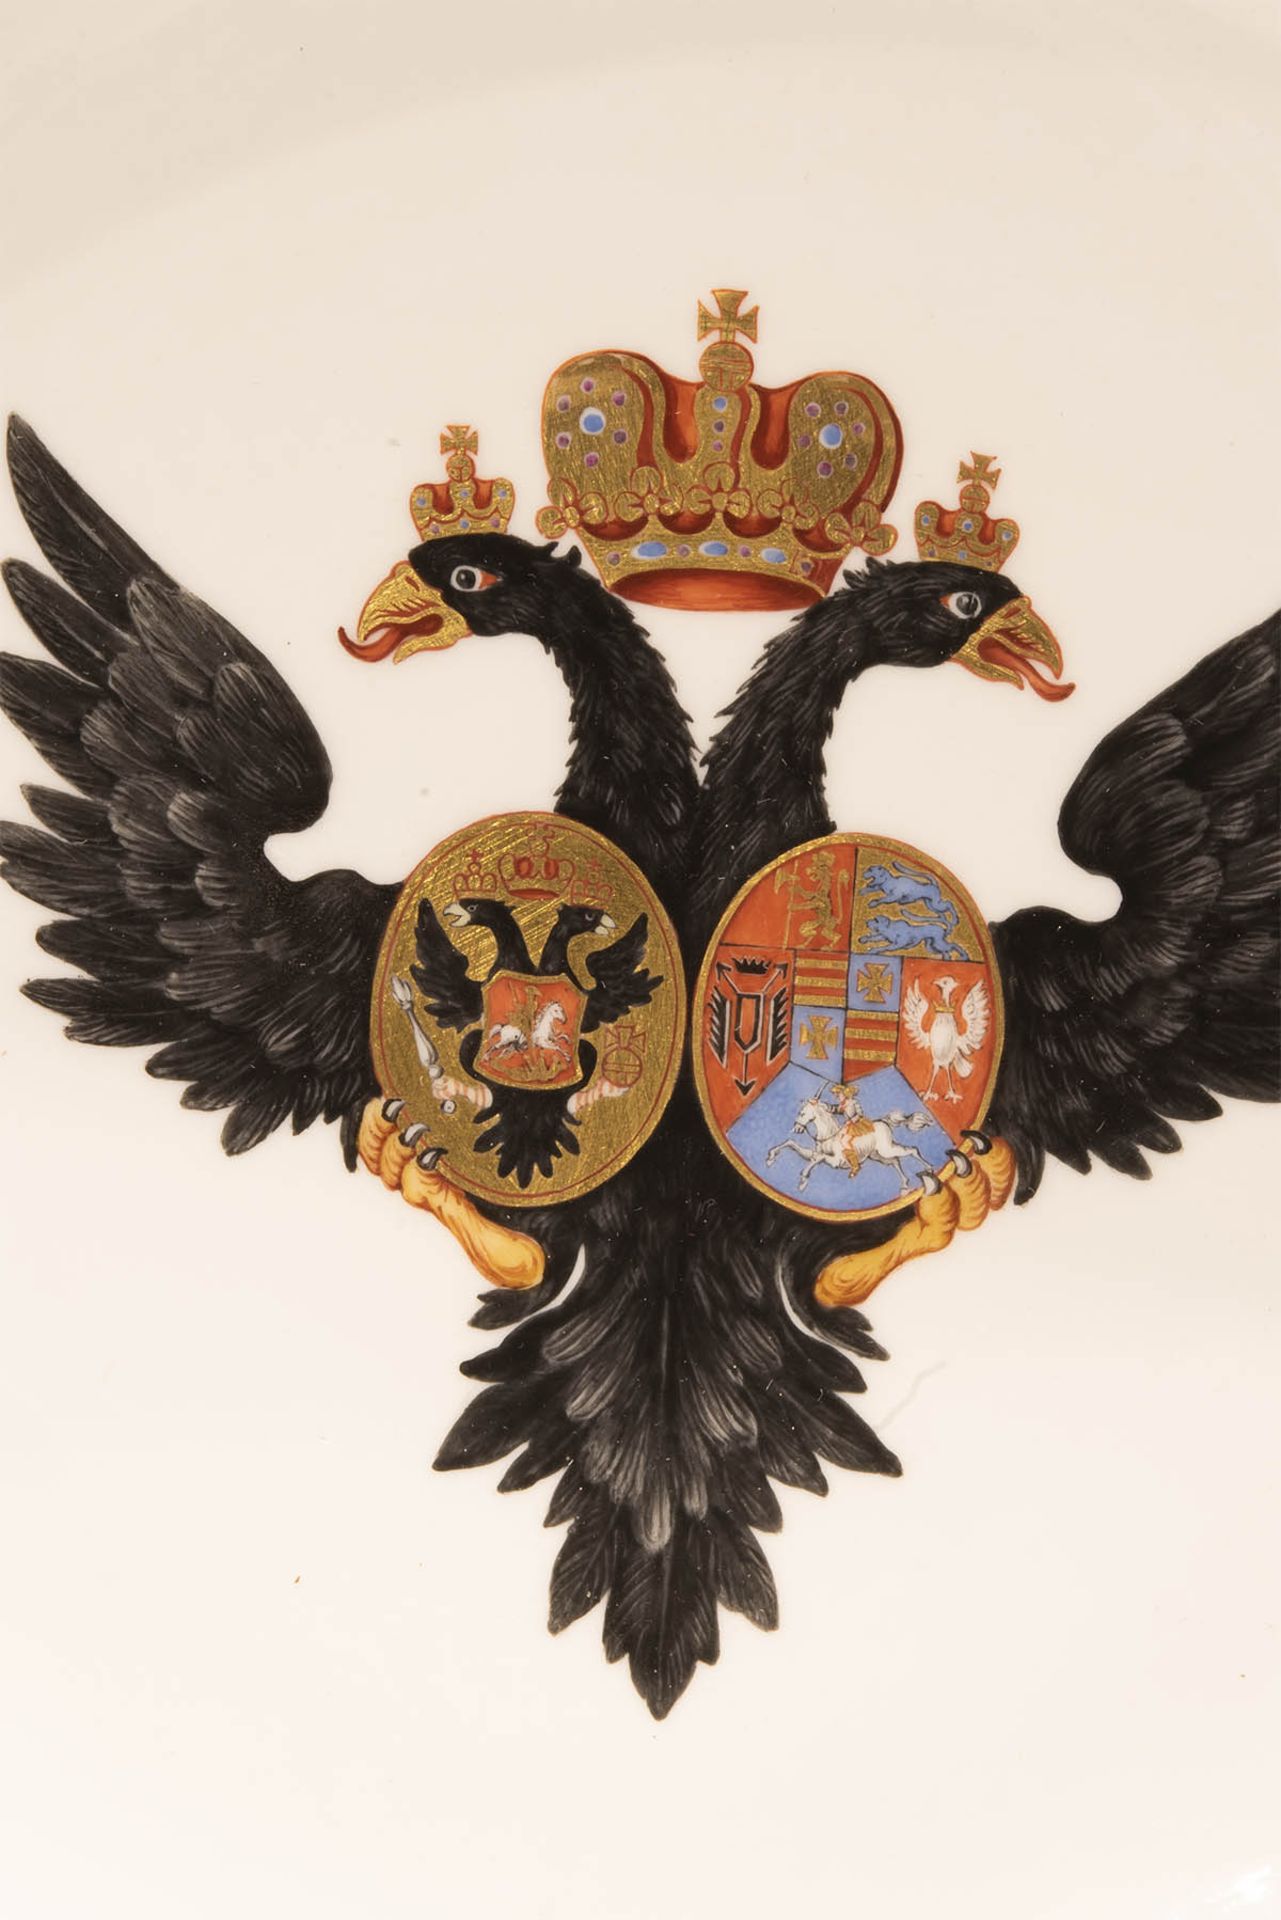 Large rare coat of arms plate from the possession of Tsar Paul I of Russia - Image 2 of 4